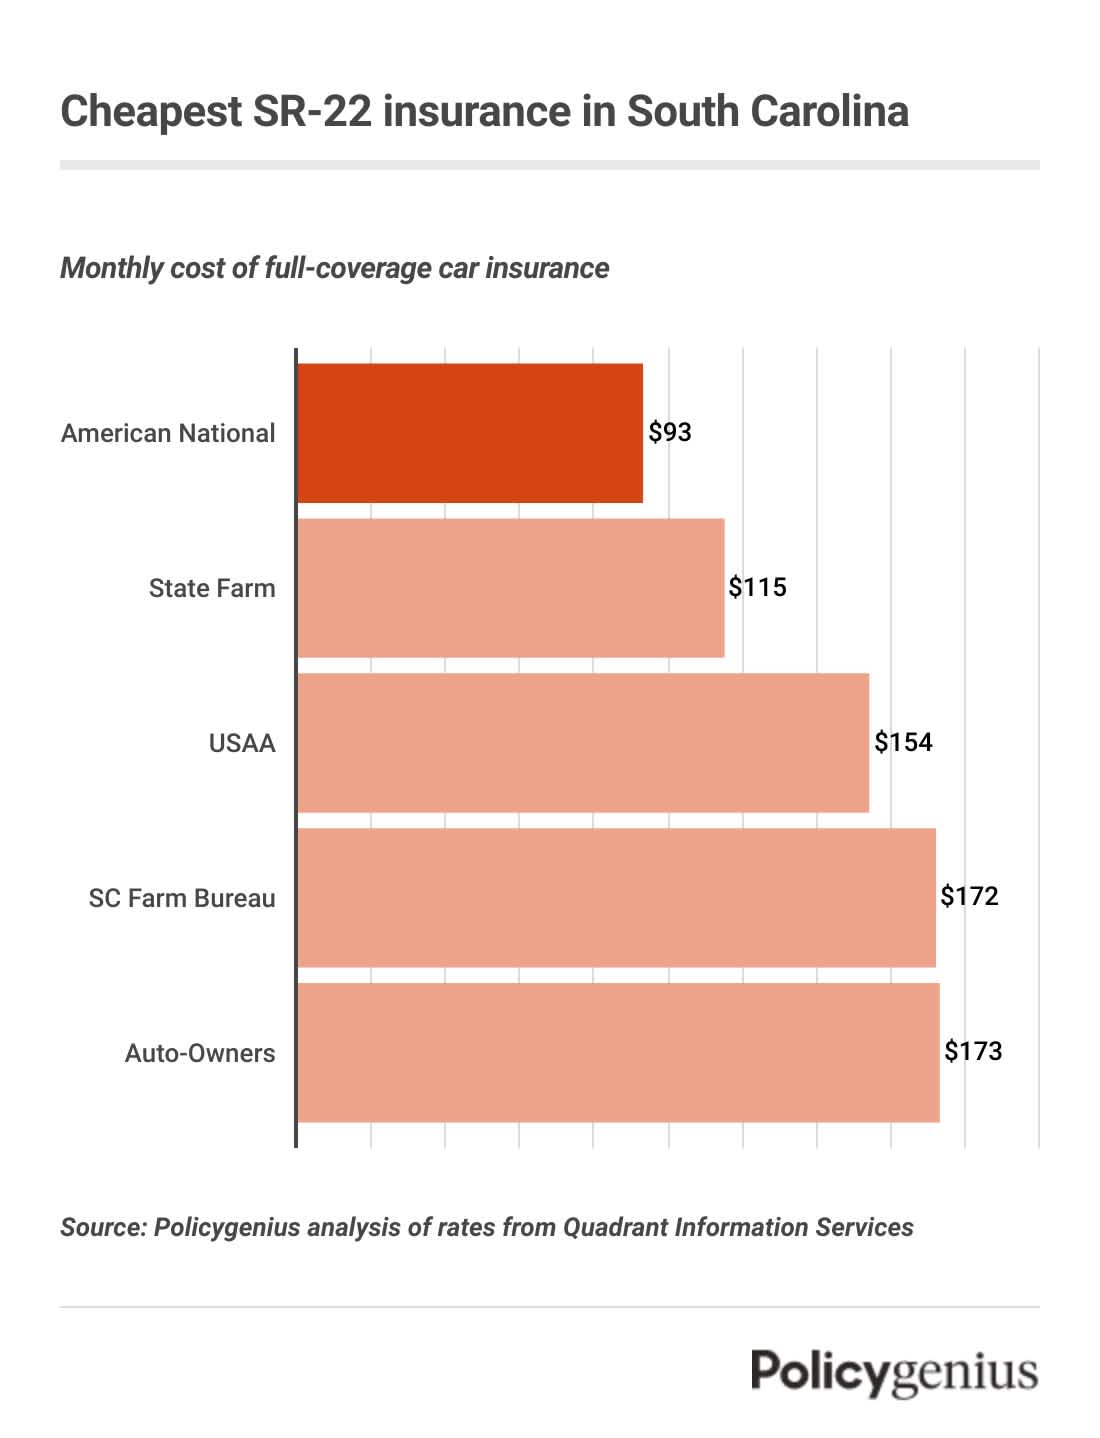 A bar graph showing the cost of Sr-22 insurance in South Carolina, with American National being the cheapest company.